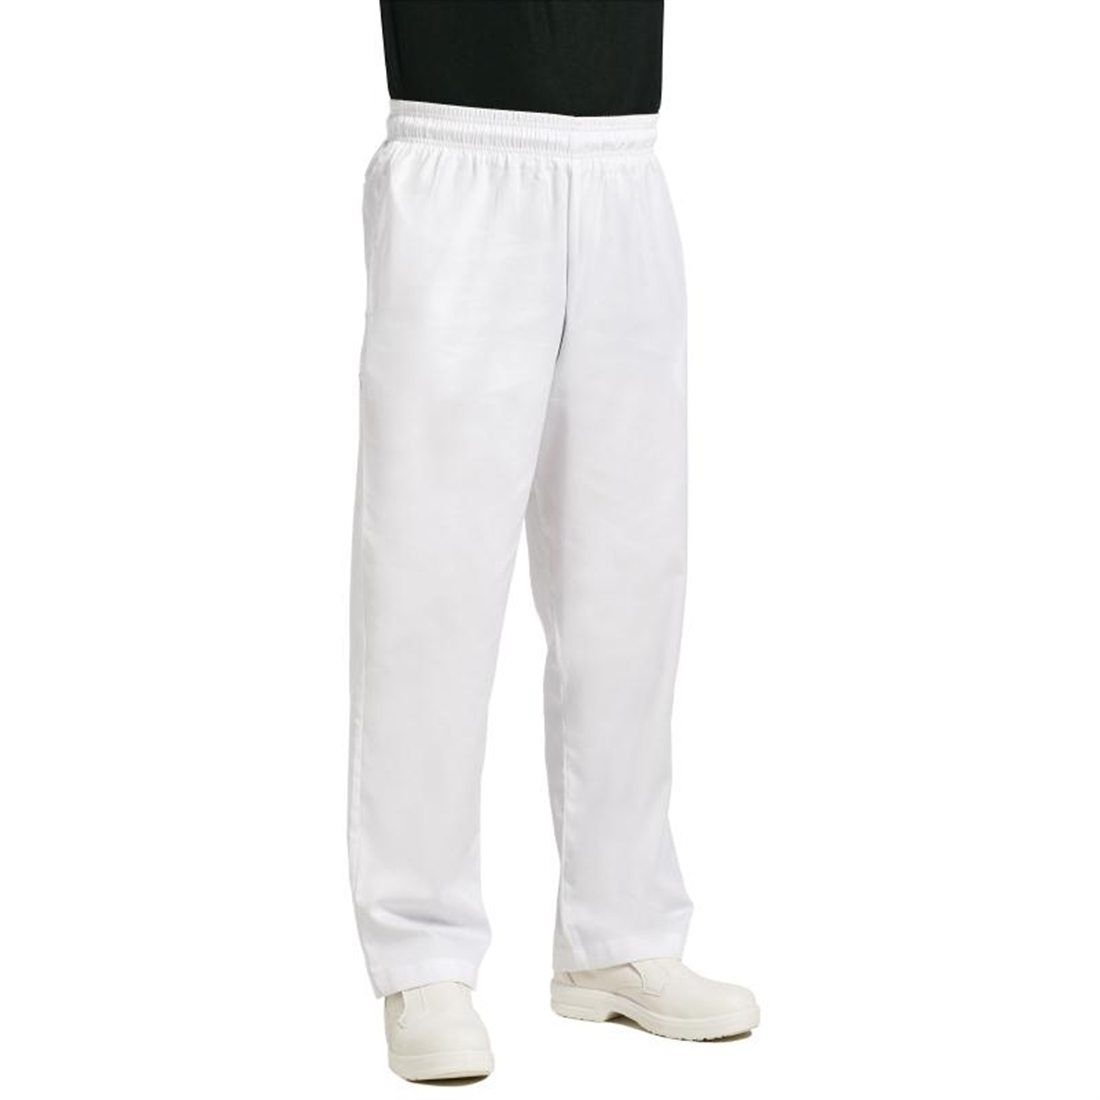 Chef Works Unisex Easyfit Chefs Trousers White M